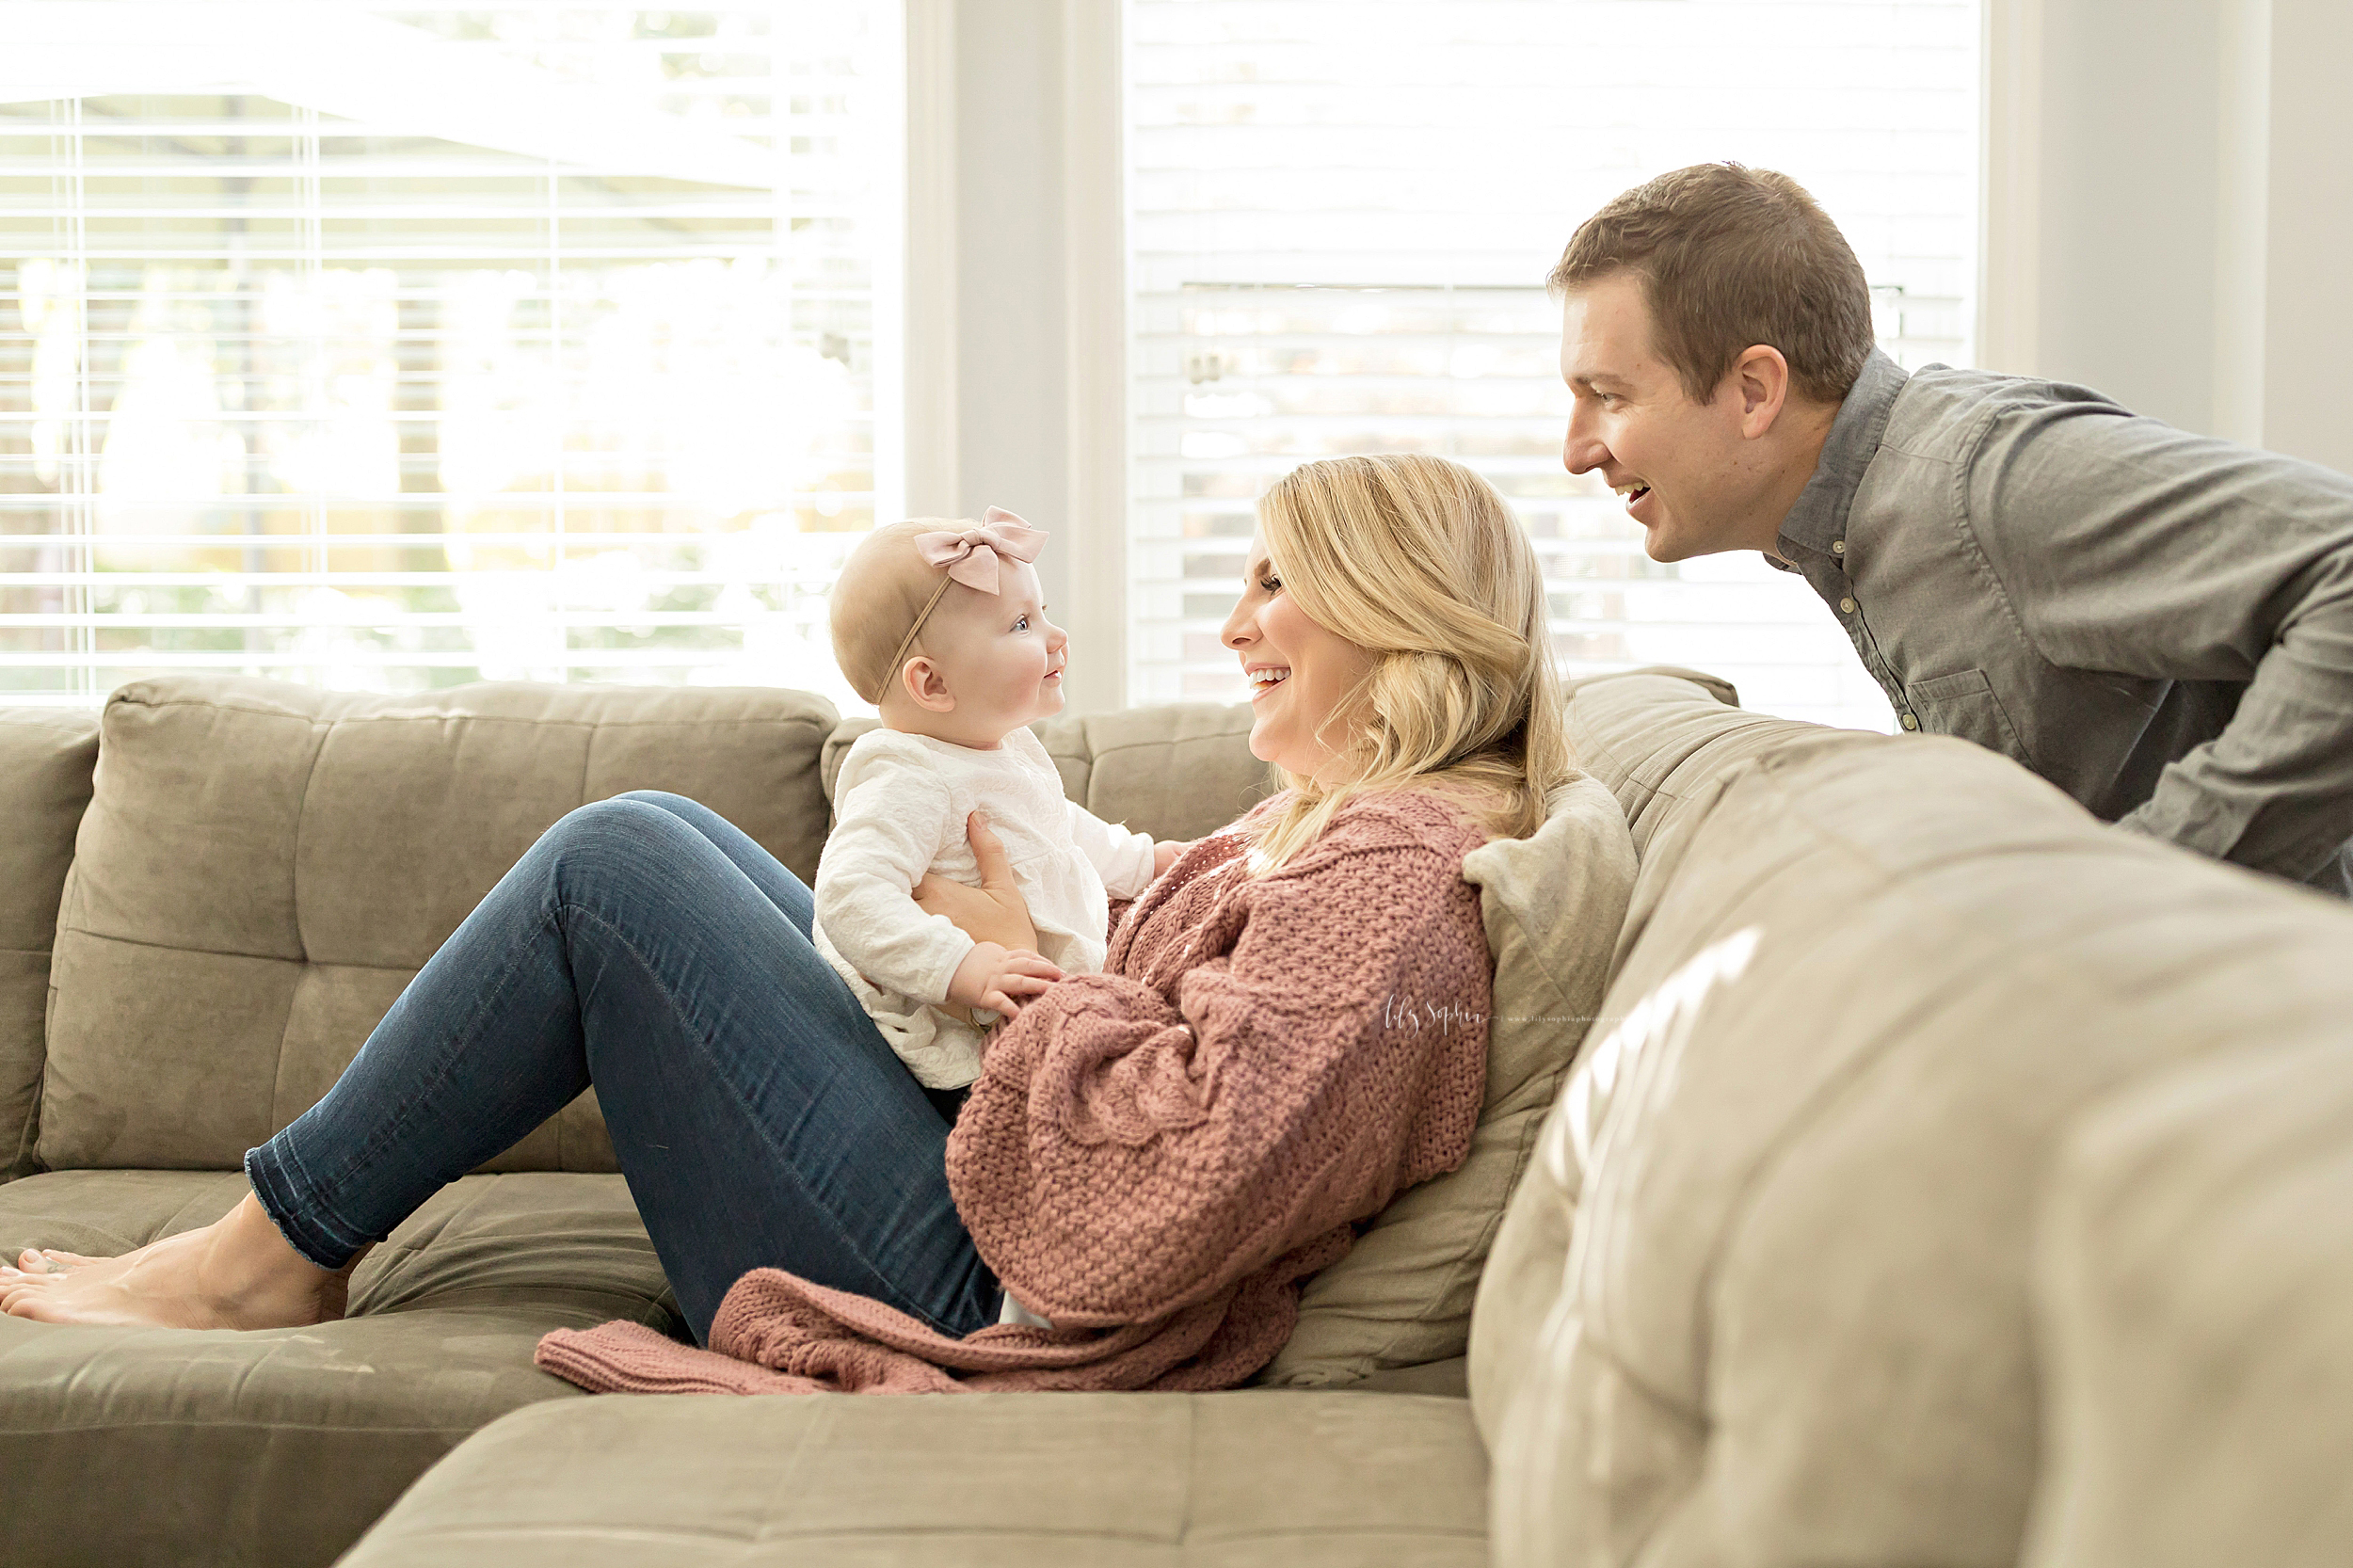 atlanta-midtown-brookhaven-ashford-dunwoody-virginia-highlands-roswell-decatur-lily-sophia-photography-in-home-six-month-milestone-family-lifestyle-session-sandy-springs_0653.jpg